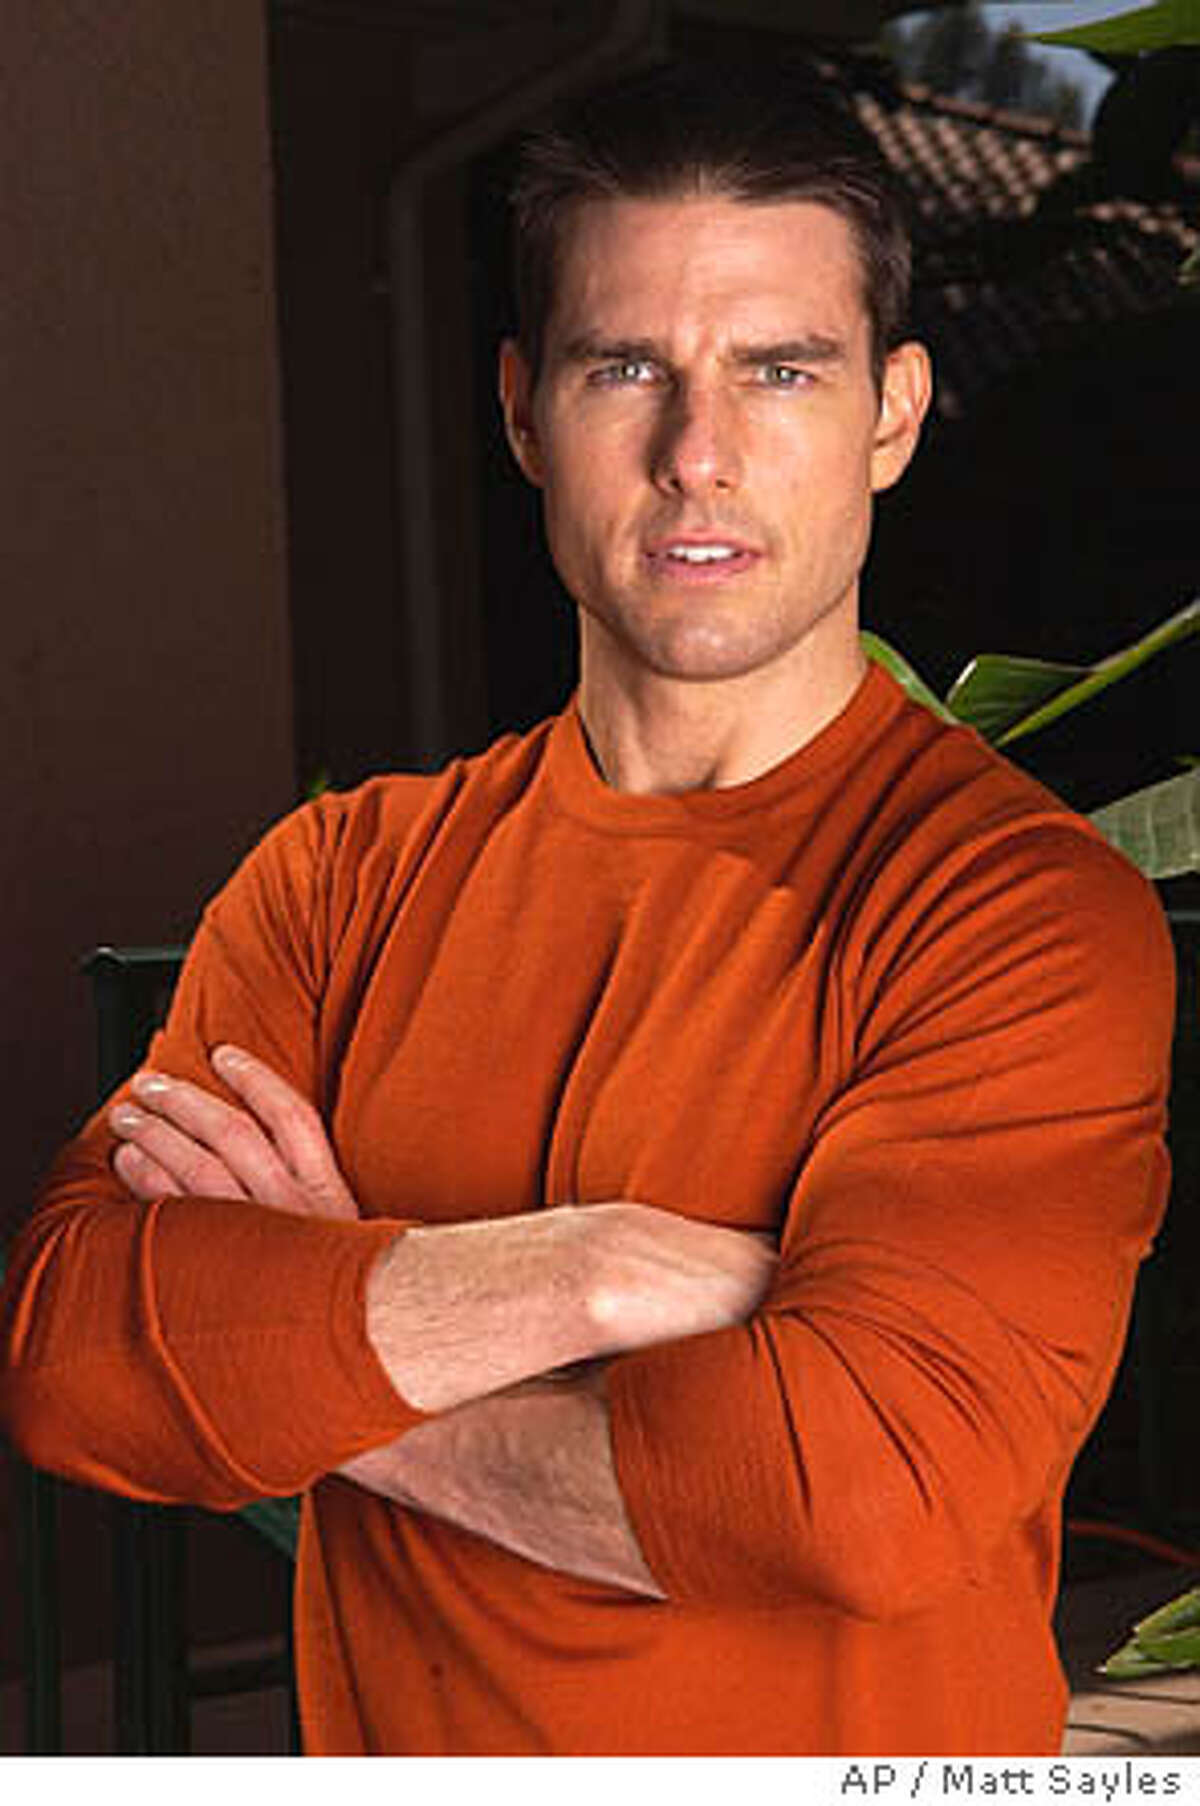 **FILE**Actor Tom Cruise poses for a portrait at the Beverly Hills Hotel in Beverly Hills, Calif., July 29, 2004. (AP Photo/Matt Sayles) Ran on: 10-14-2004 Tom Cruise